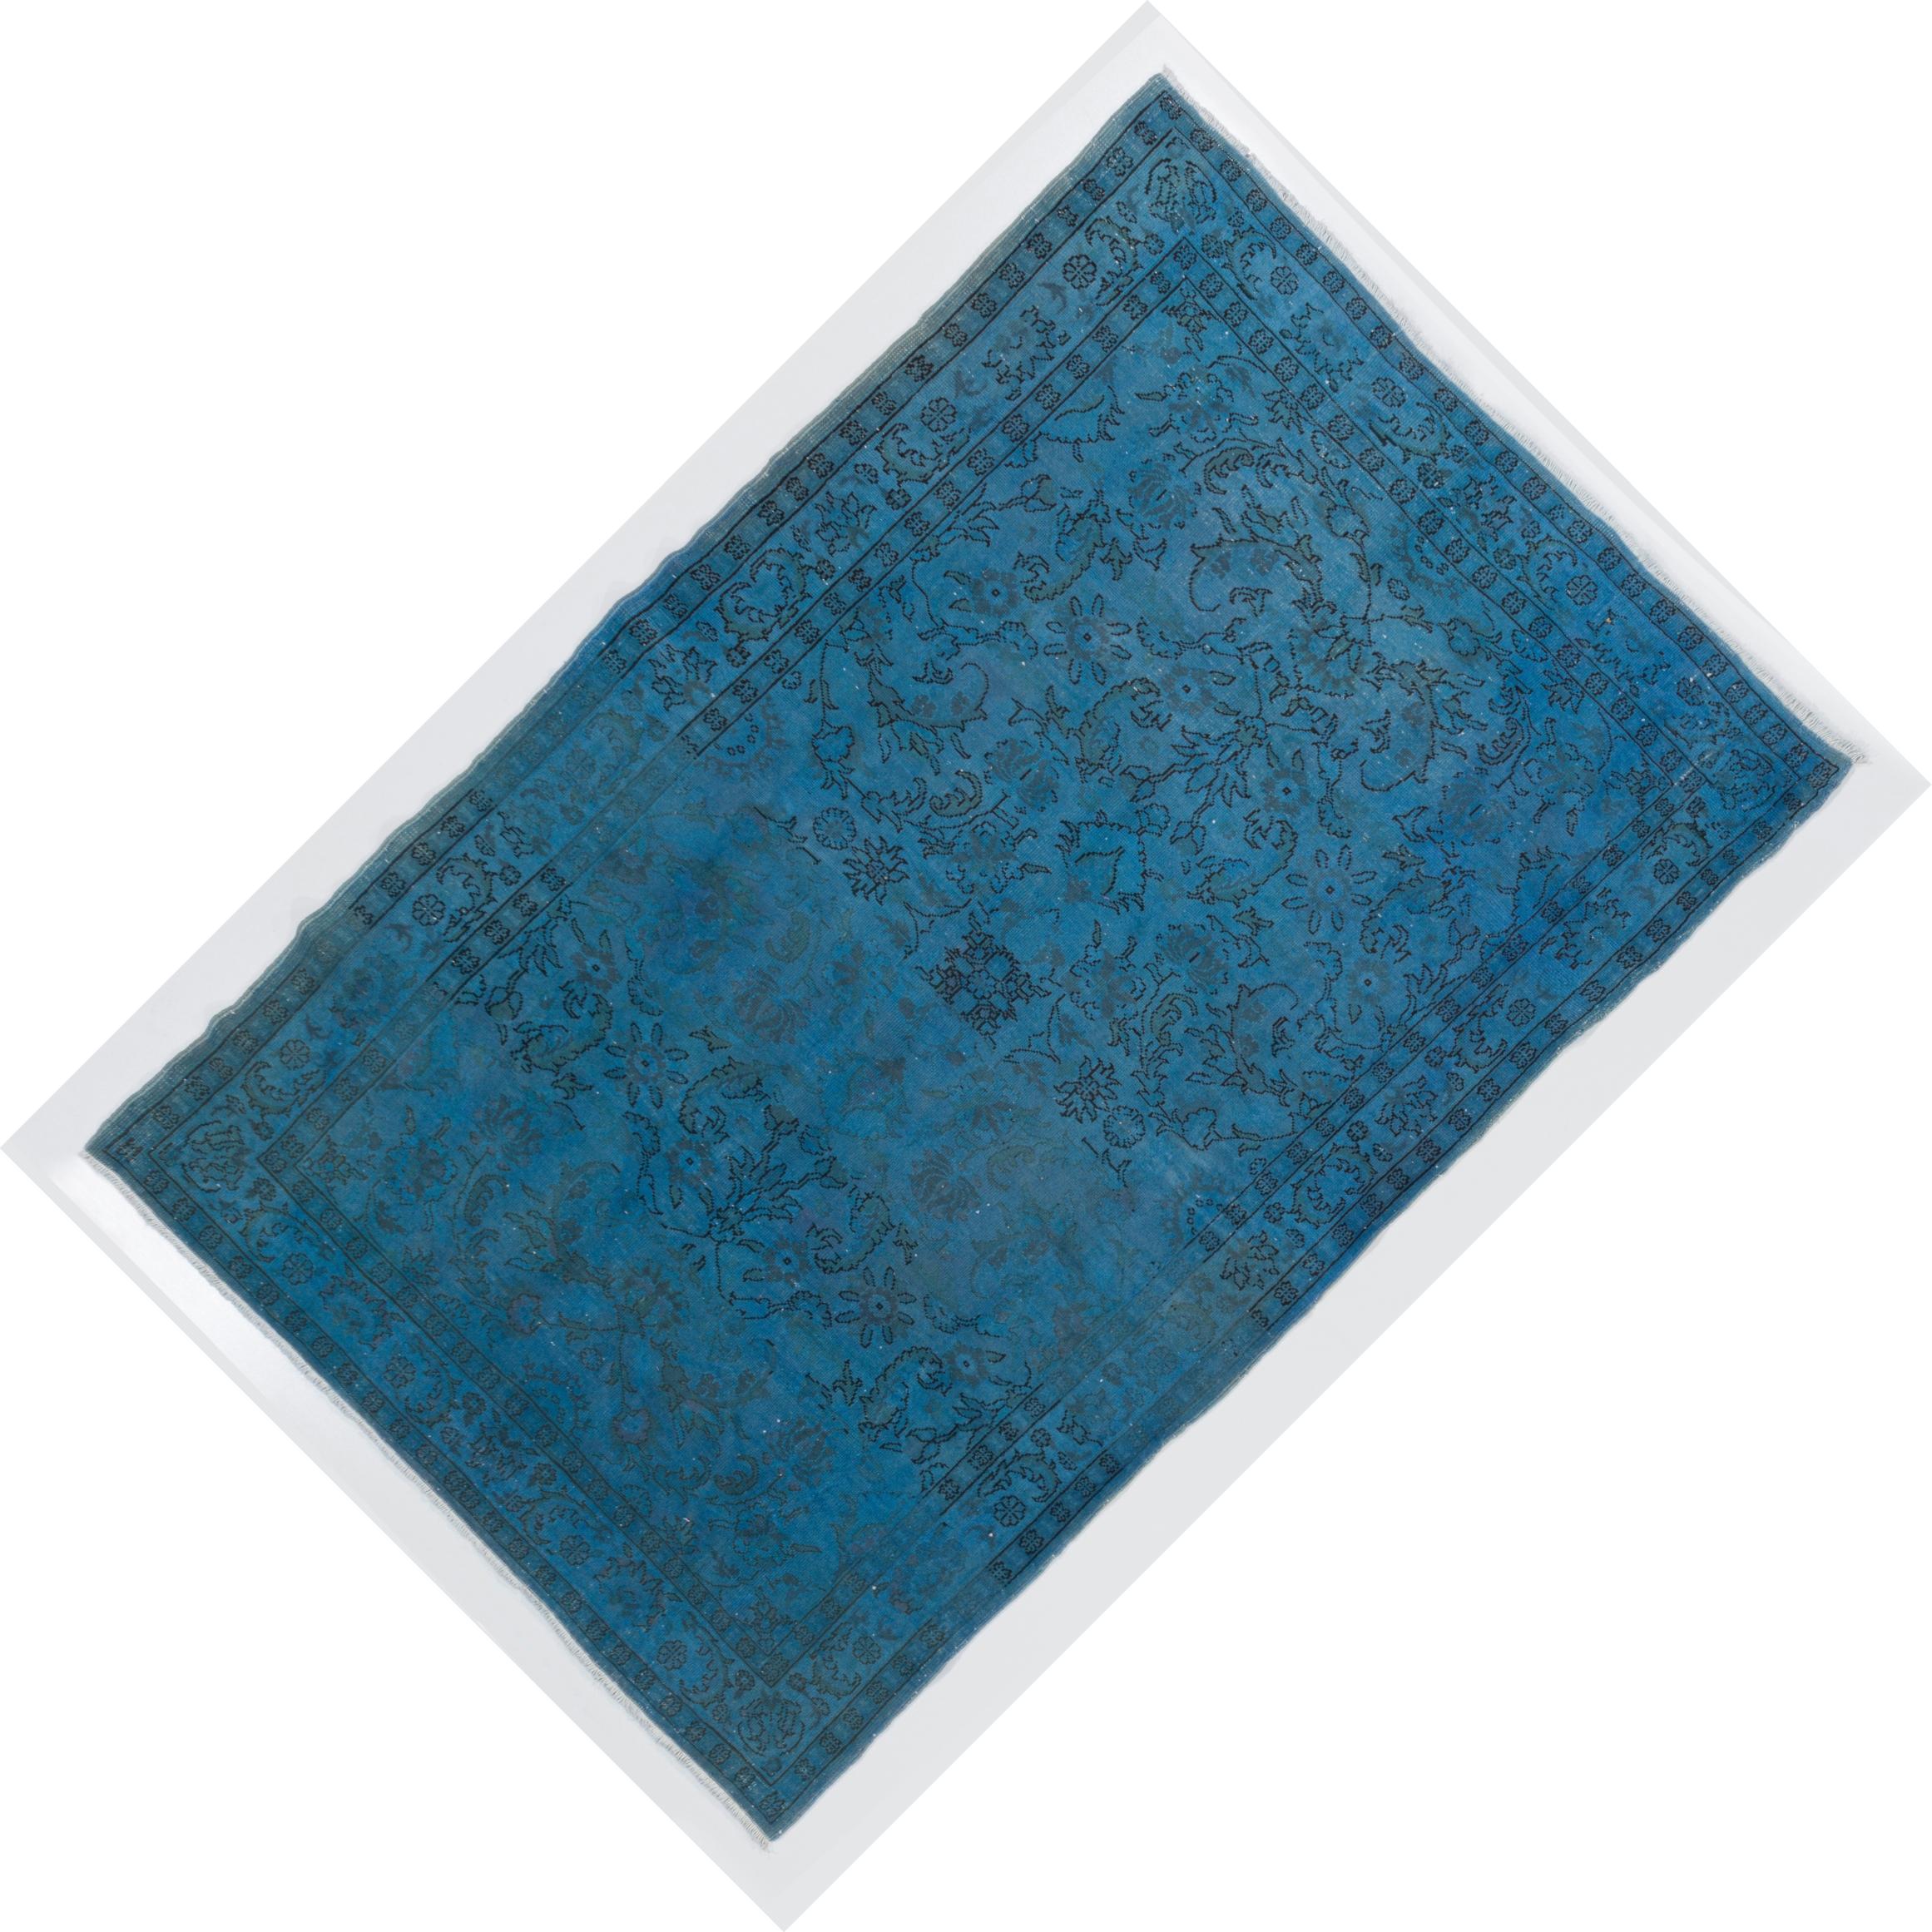 Wool 1960s Turkish Rug Re-Dyed in Blue Color, Ideal for Contemporary Interiors